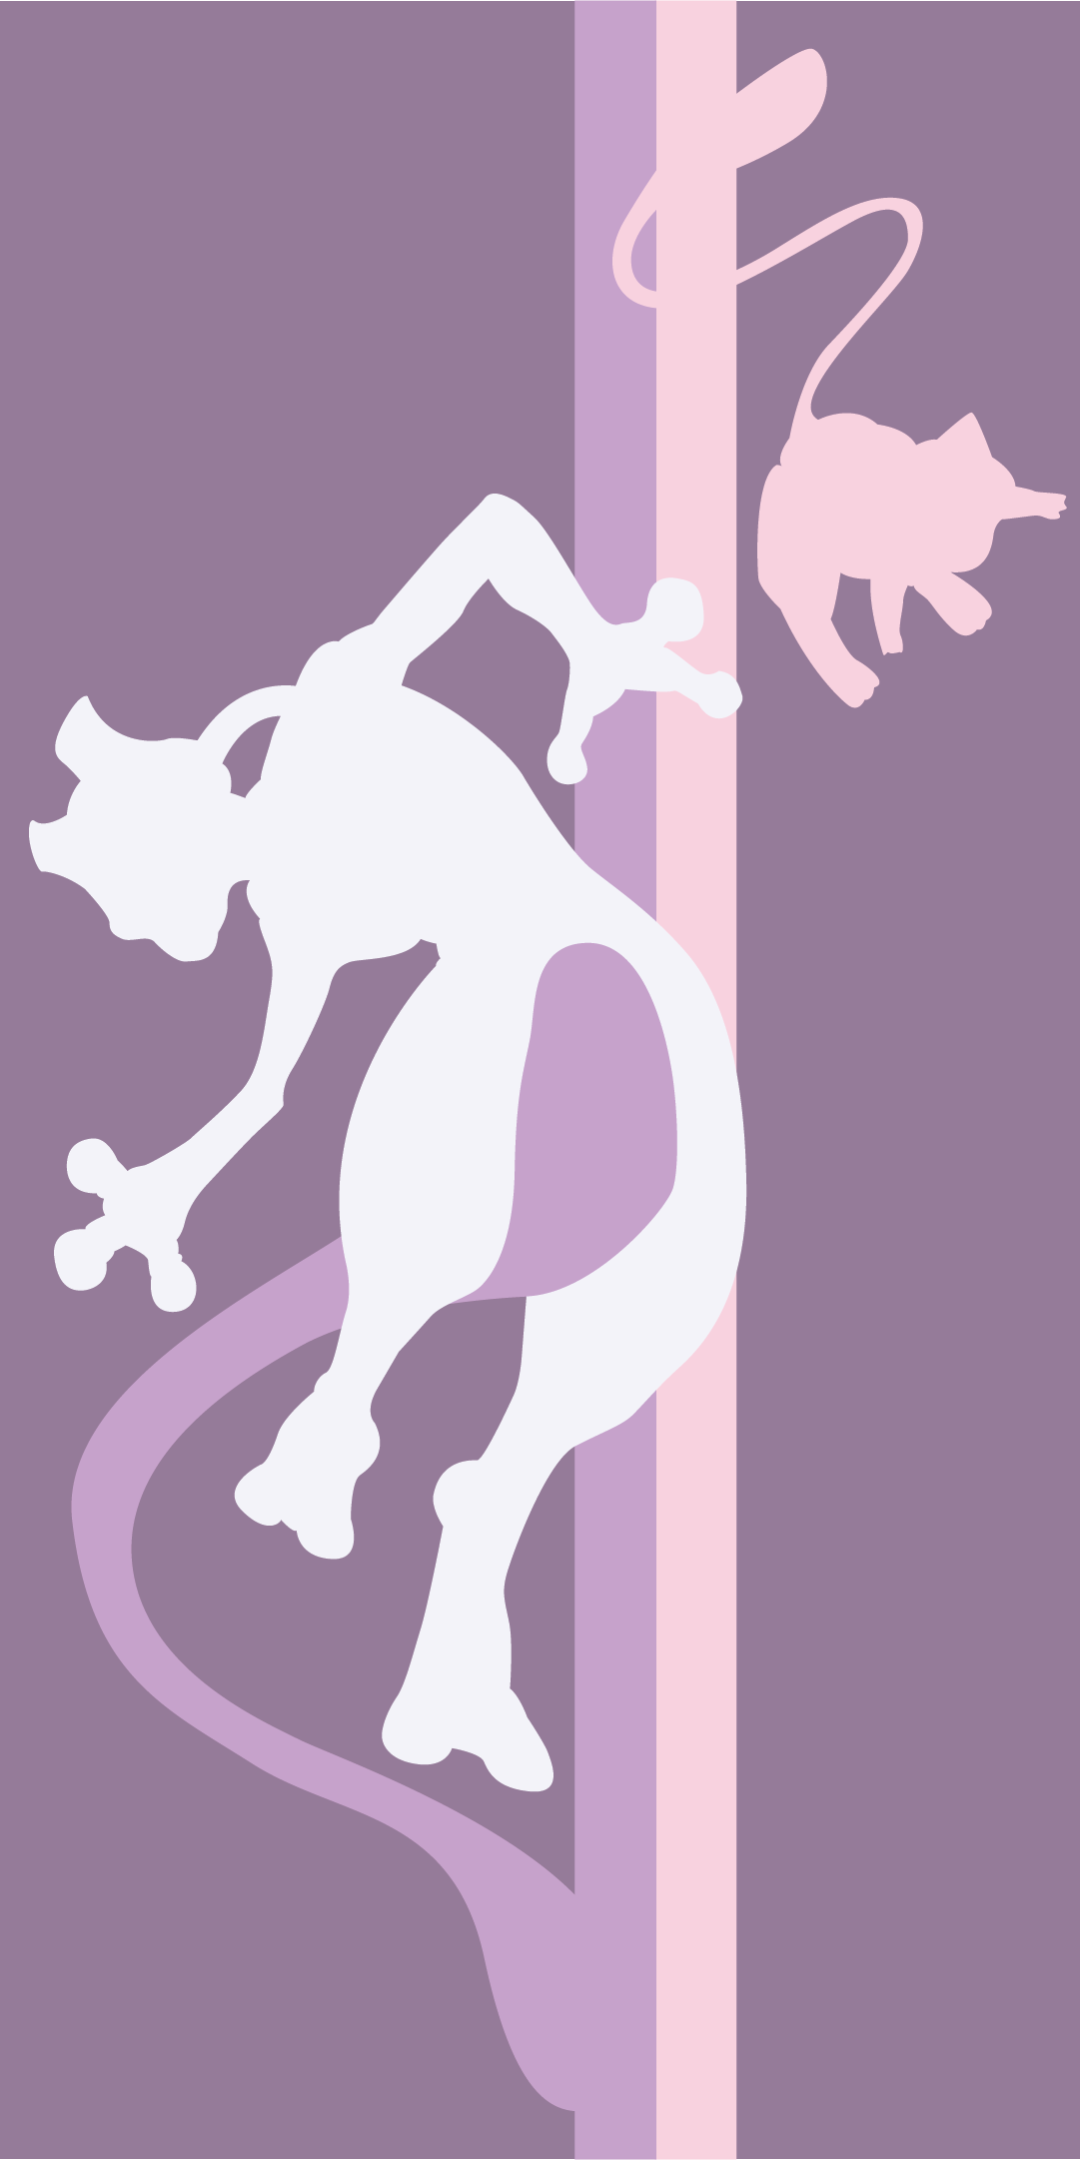 mew and mewtwo wallpapers wallpaper cave mew and mewtwo wallpapers wallpaper cave